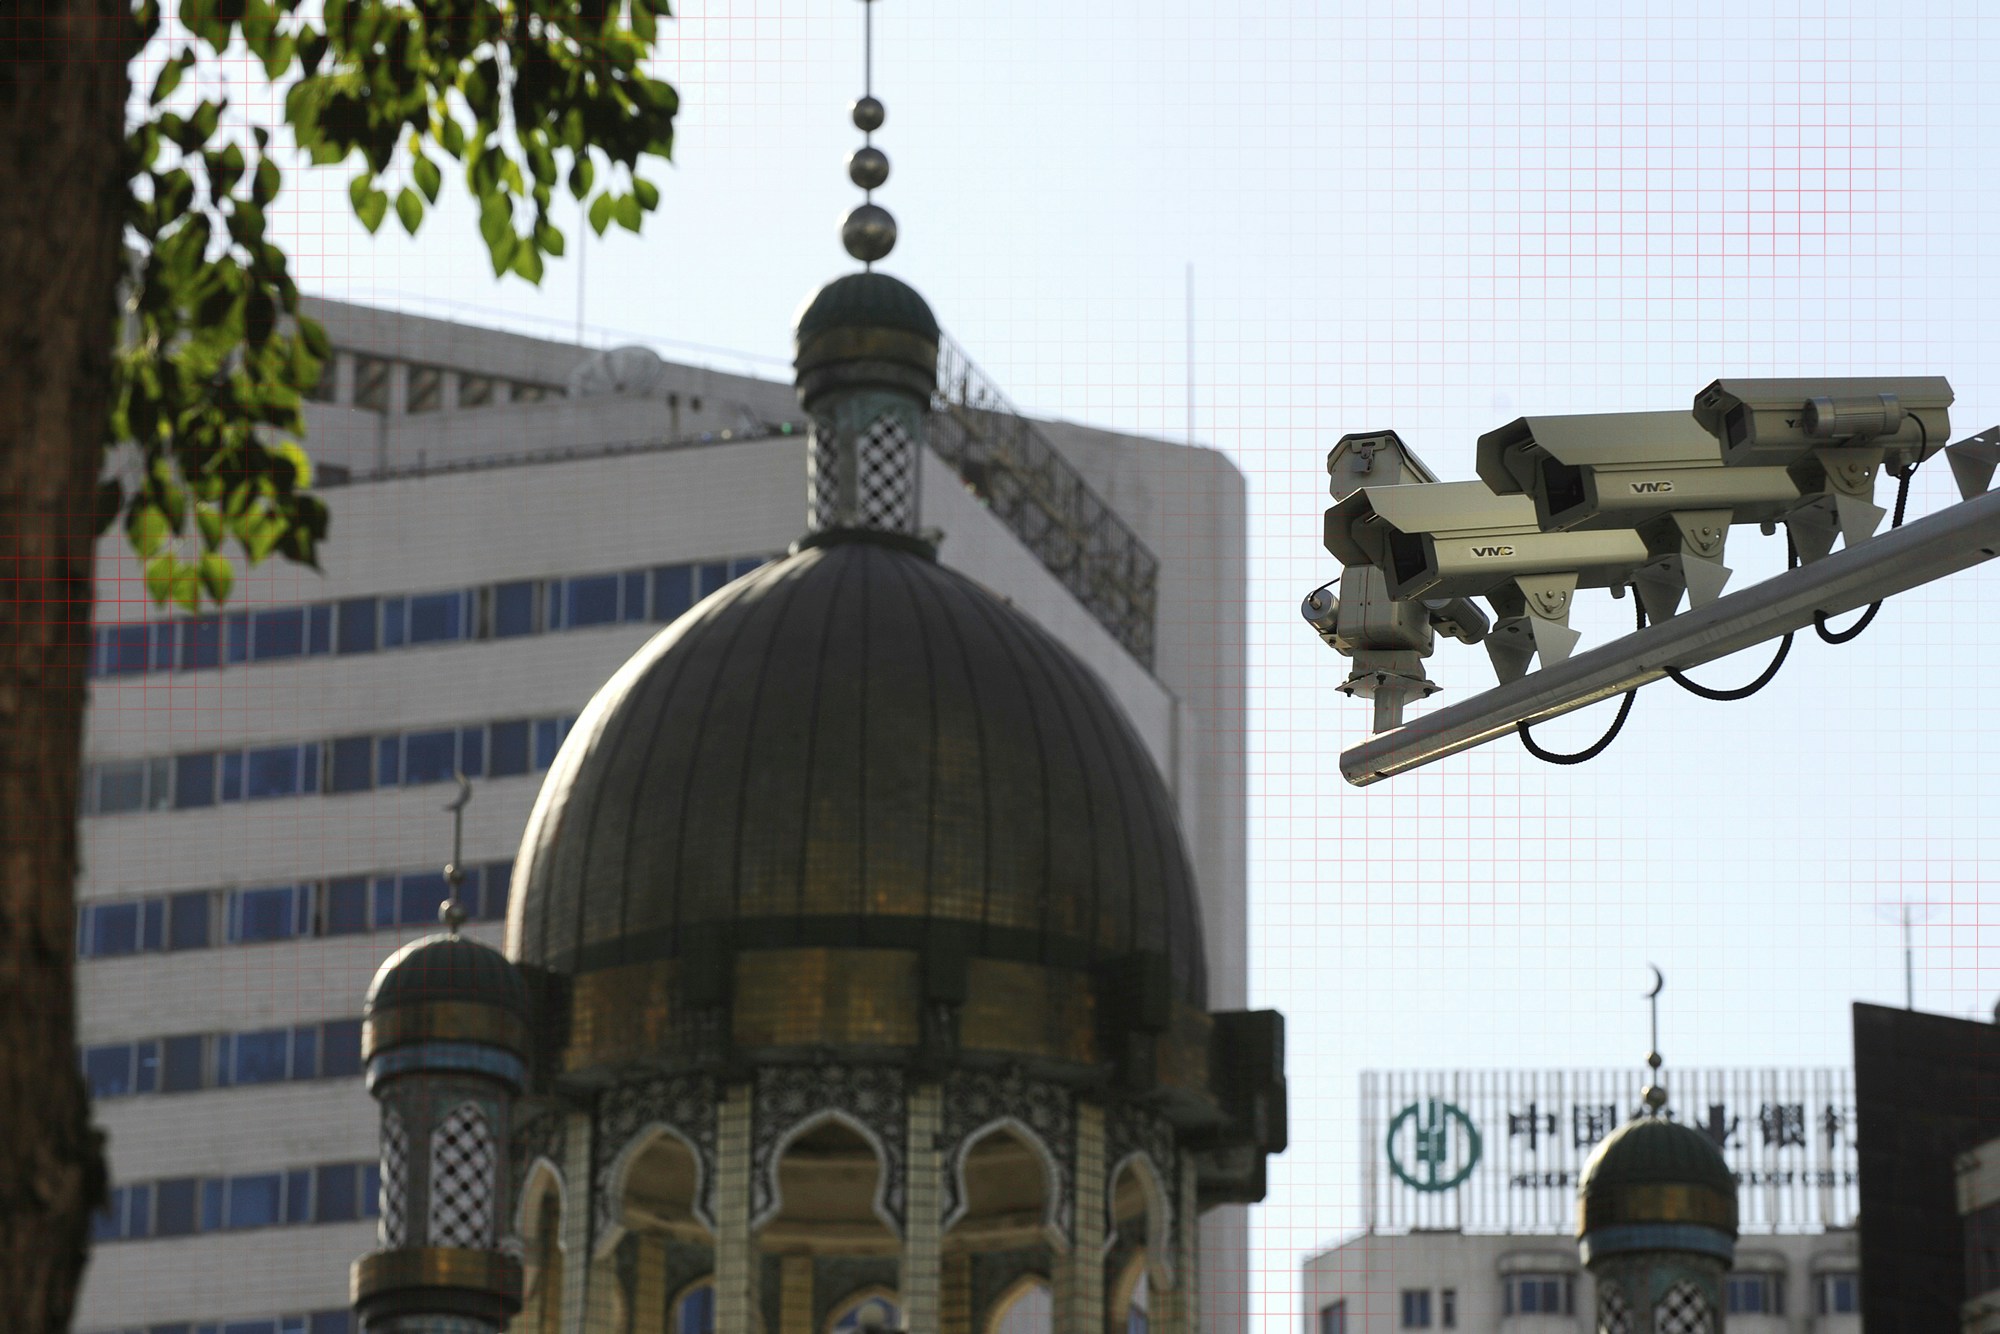 Security cameras are seen (R) on a street in Urumqi, capital of China's Xinjiang region on July 2, 2010.